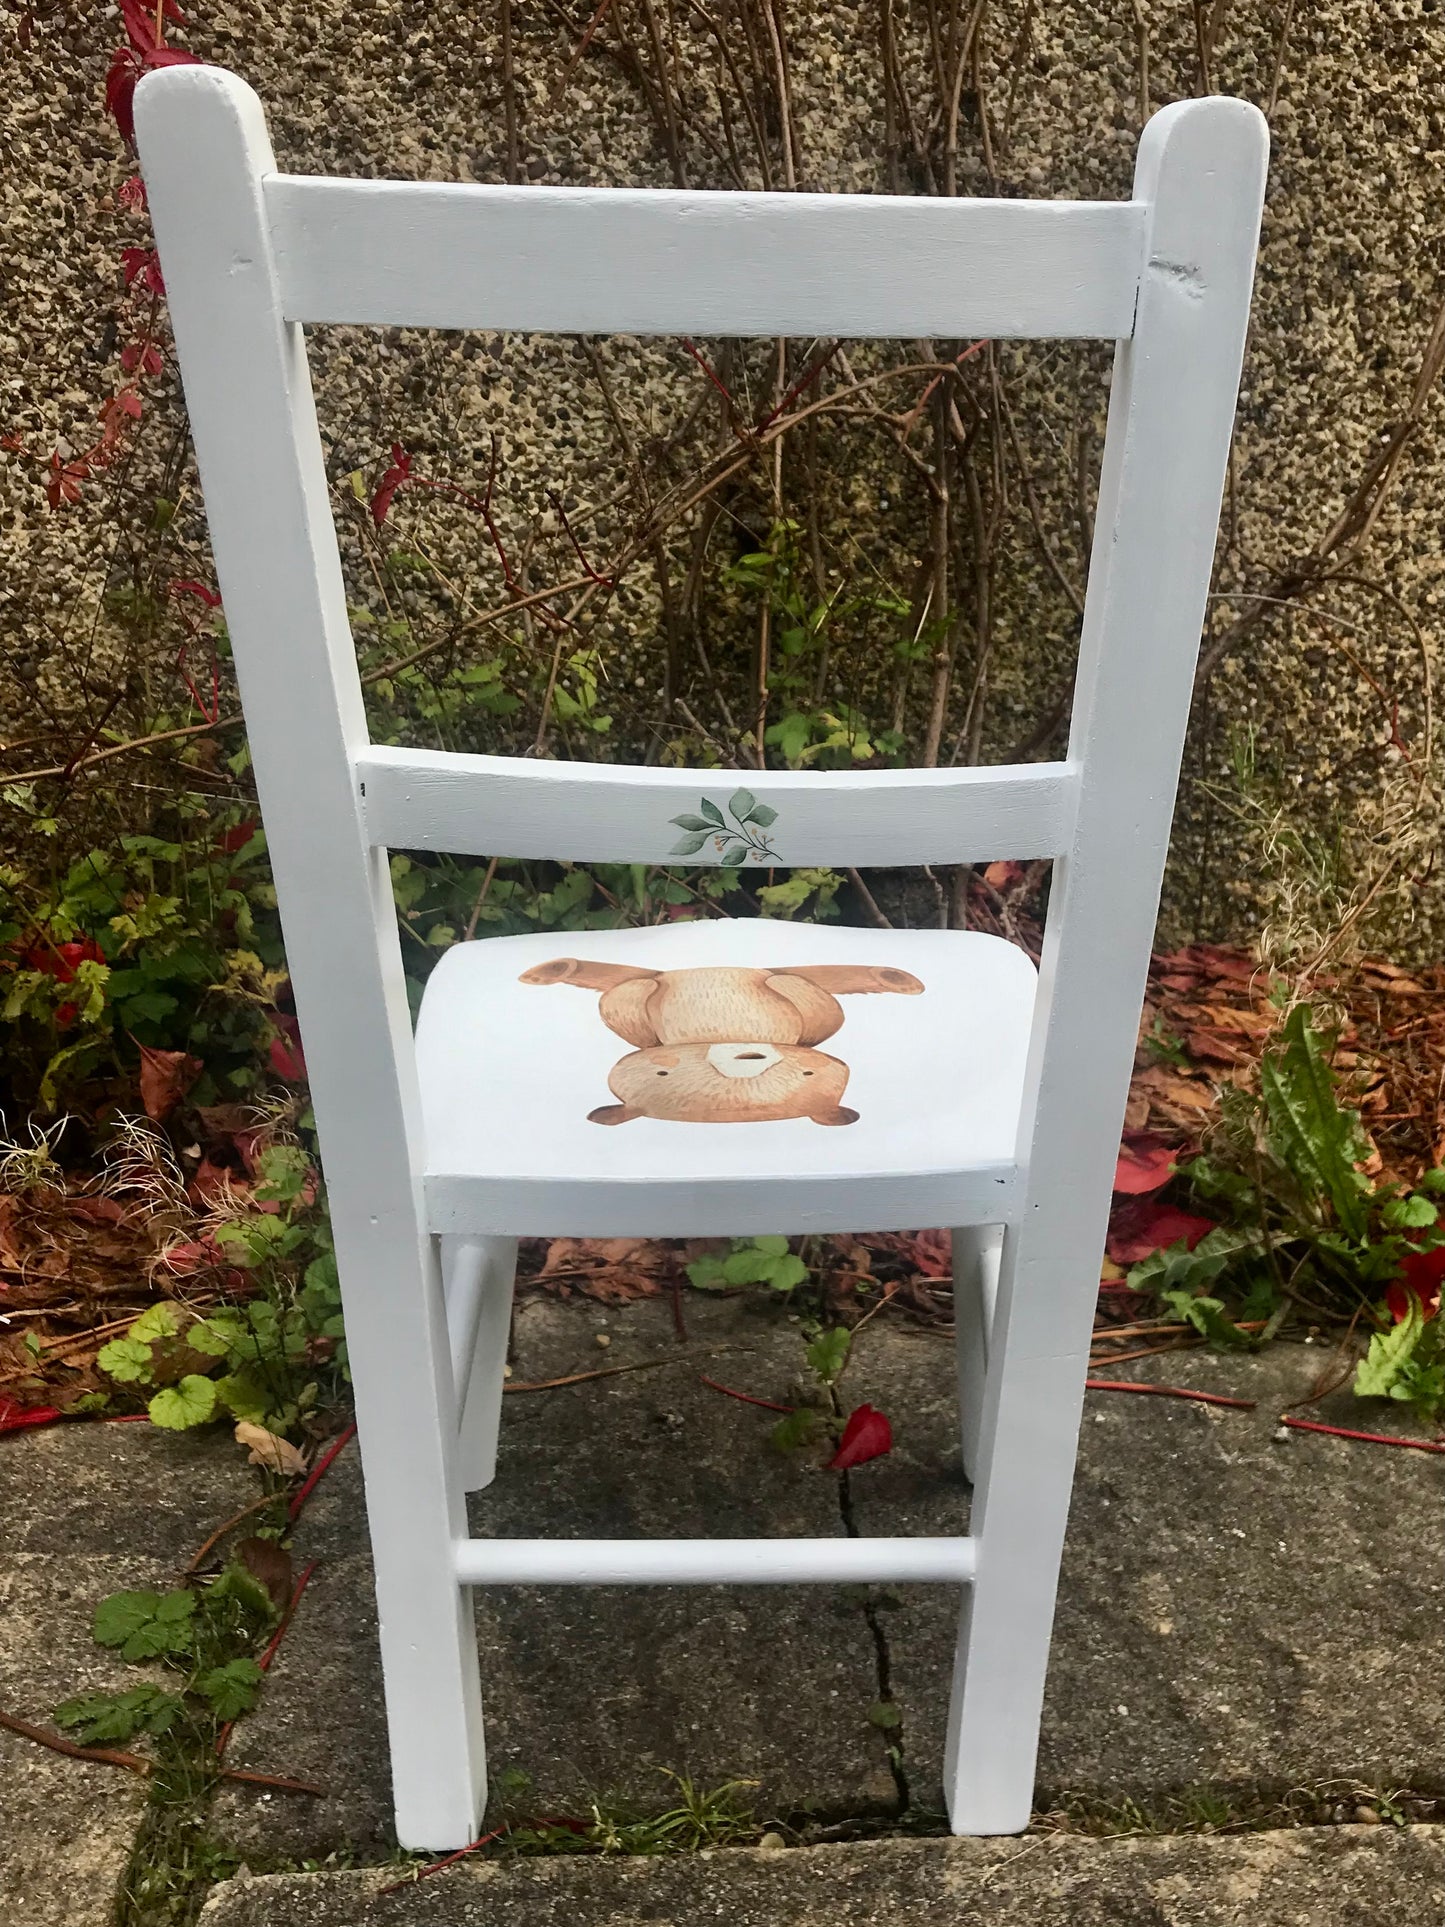 Commission for Hannah- personalised children's wooden school chair with Bear design